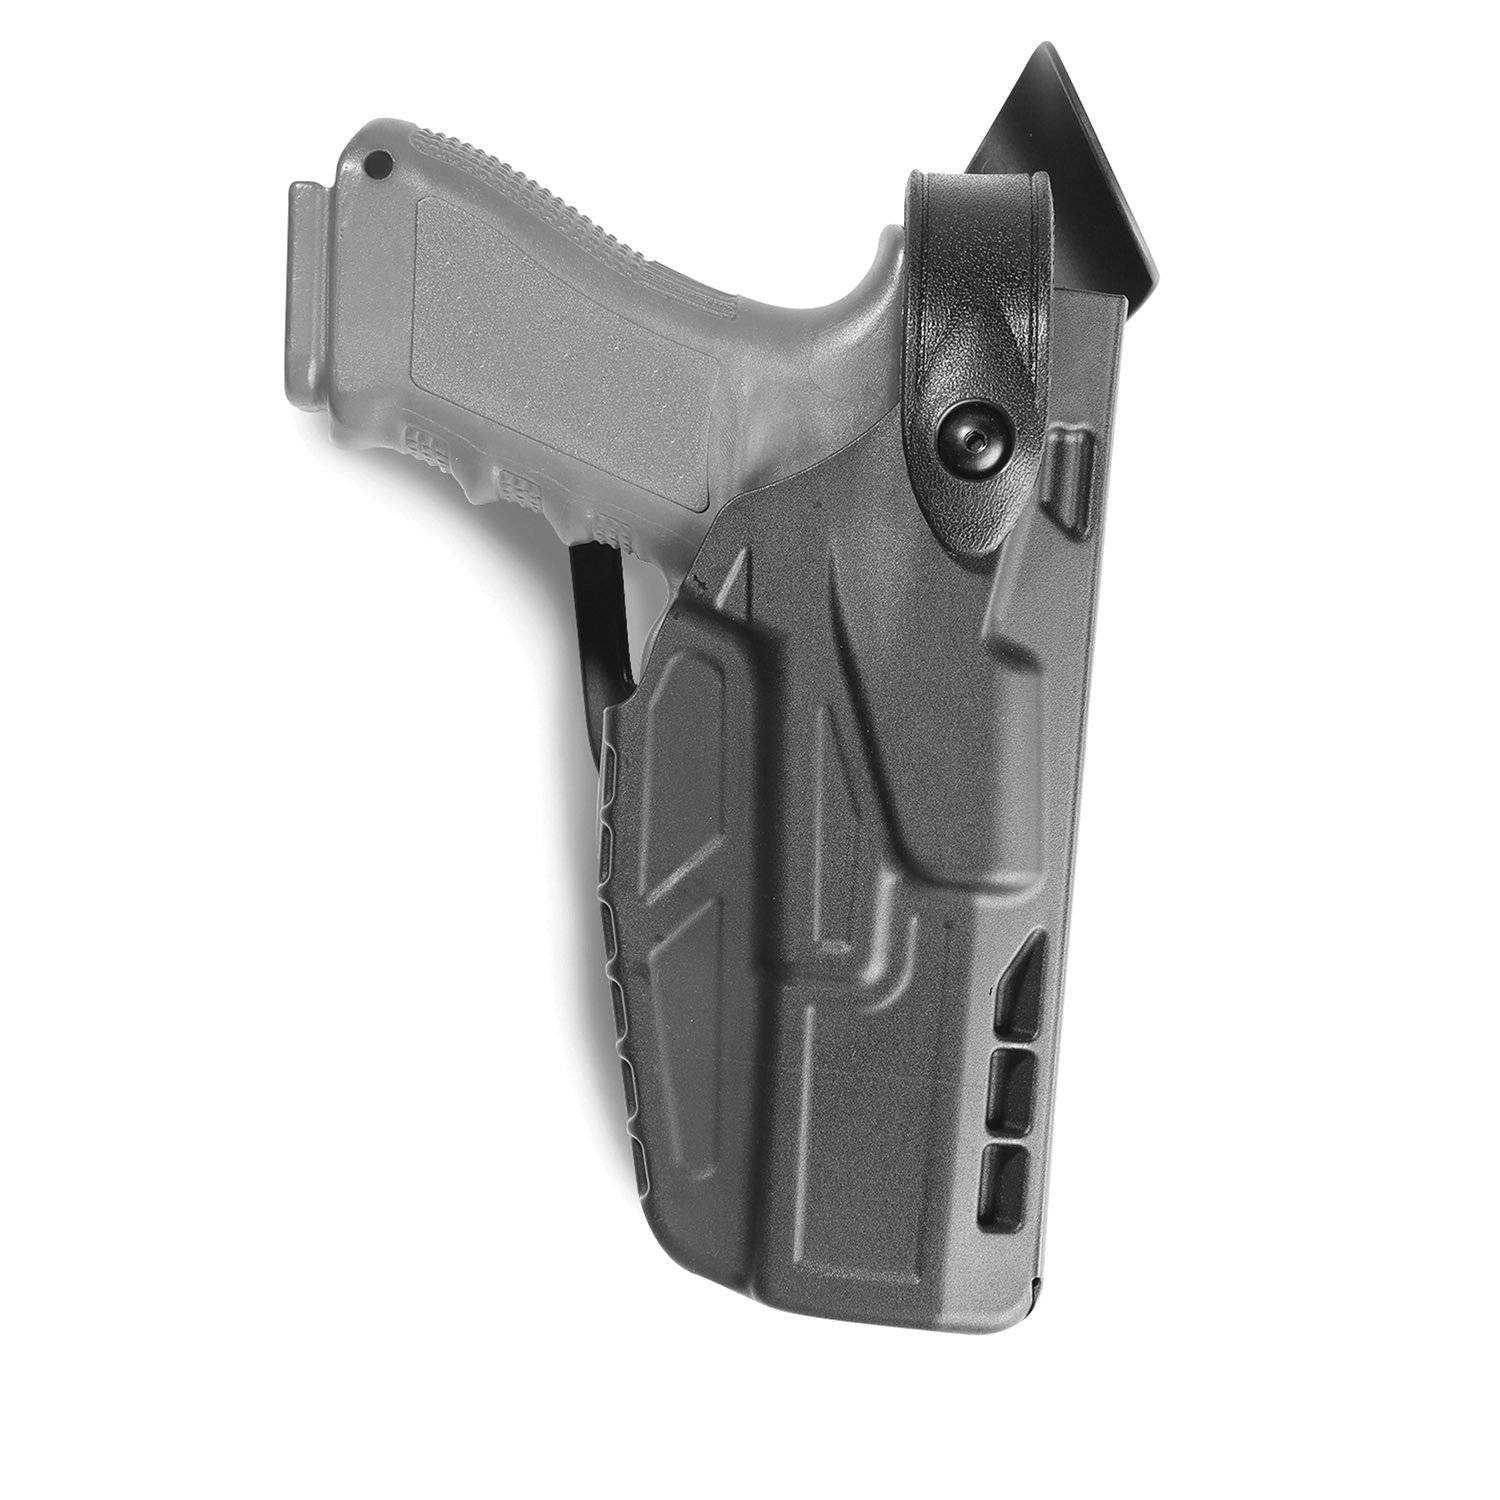 Safariland 7ts Als Level III Retention Mid-ride Duty Holster for sale online